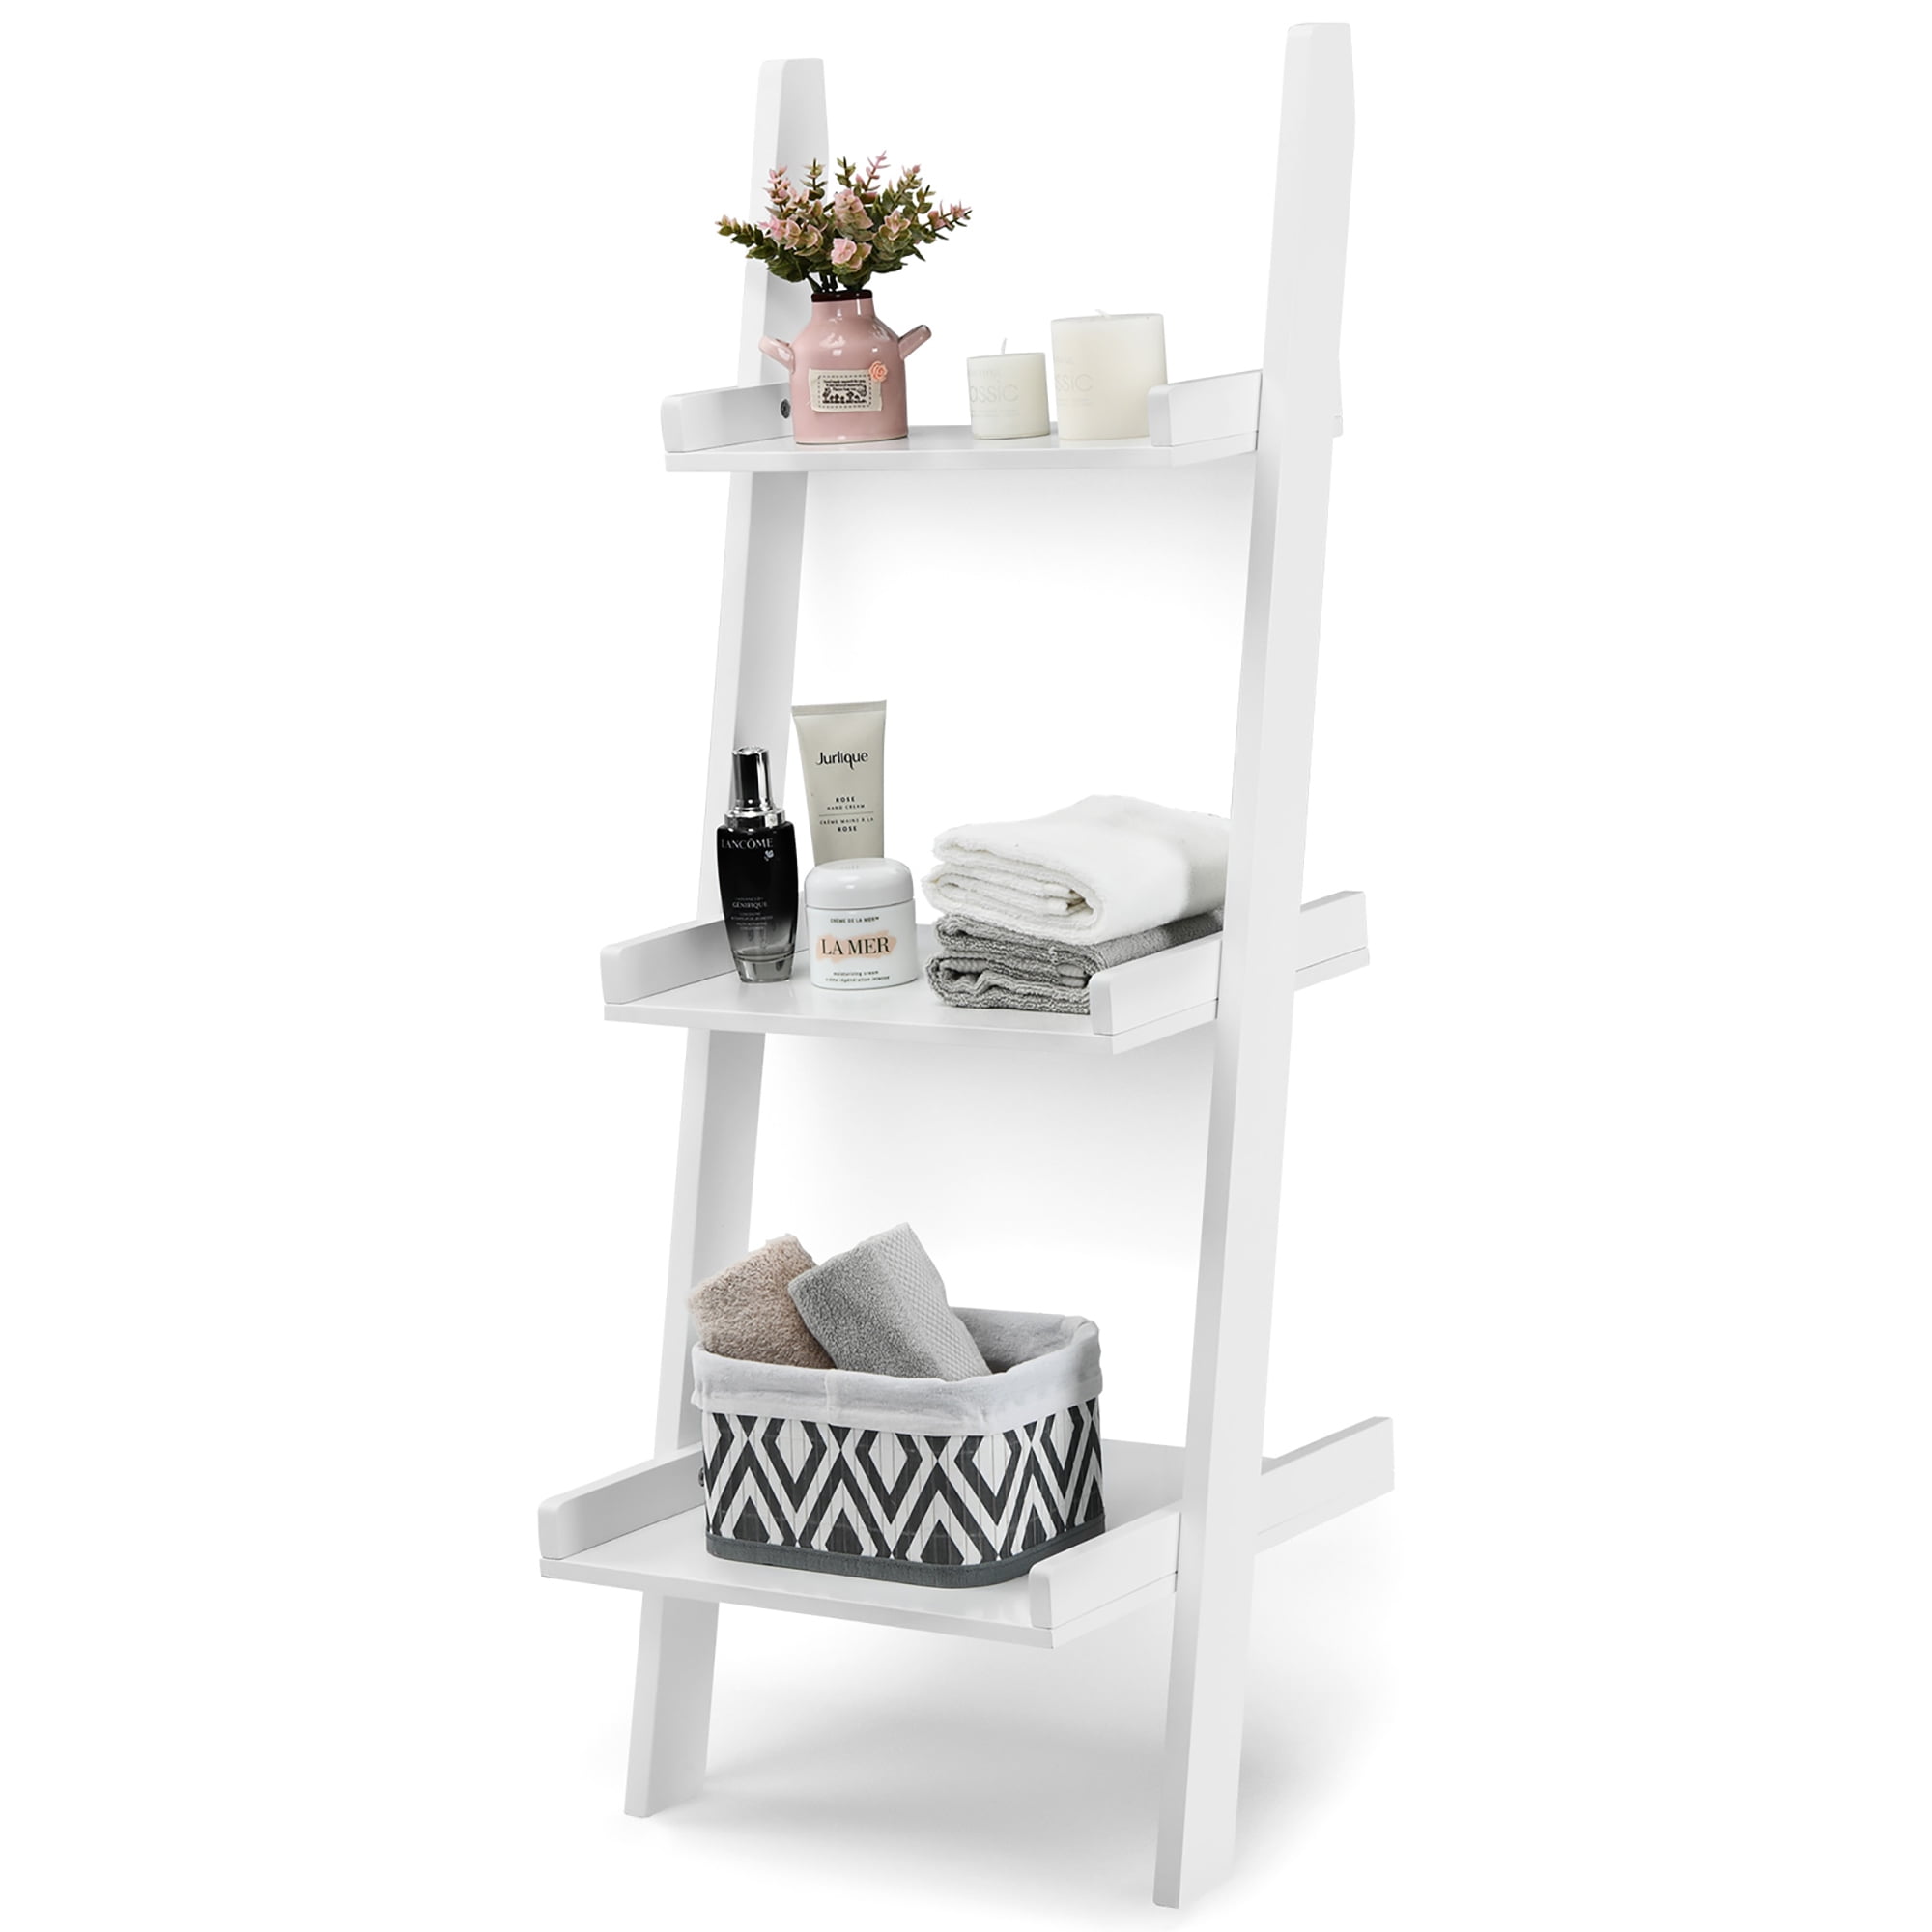 Costway 3 Tier Leaning Wall Ladder Book, How To Stop Floating Shelves Leaning